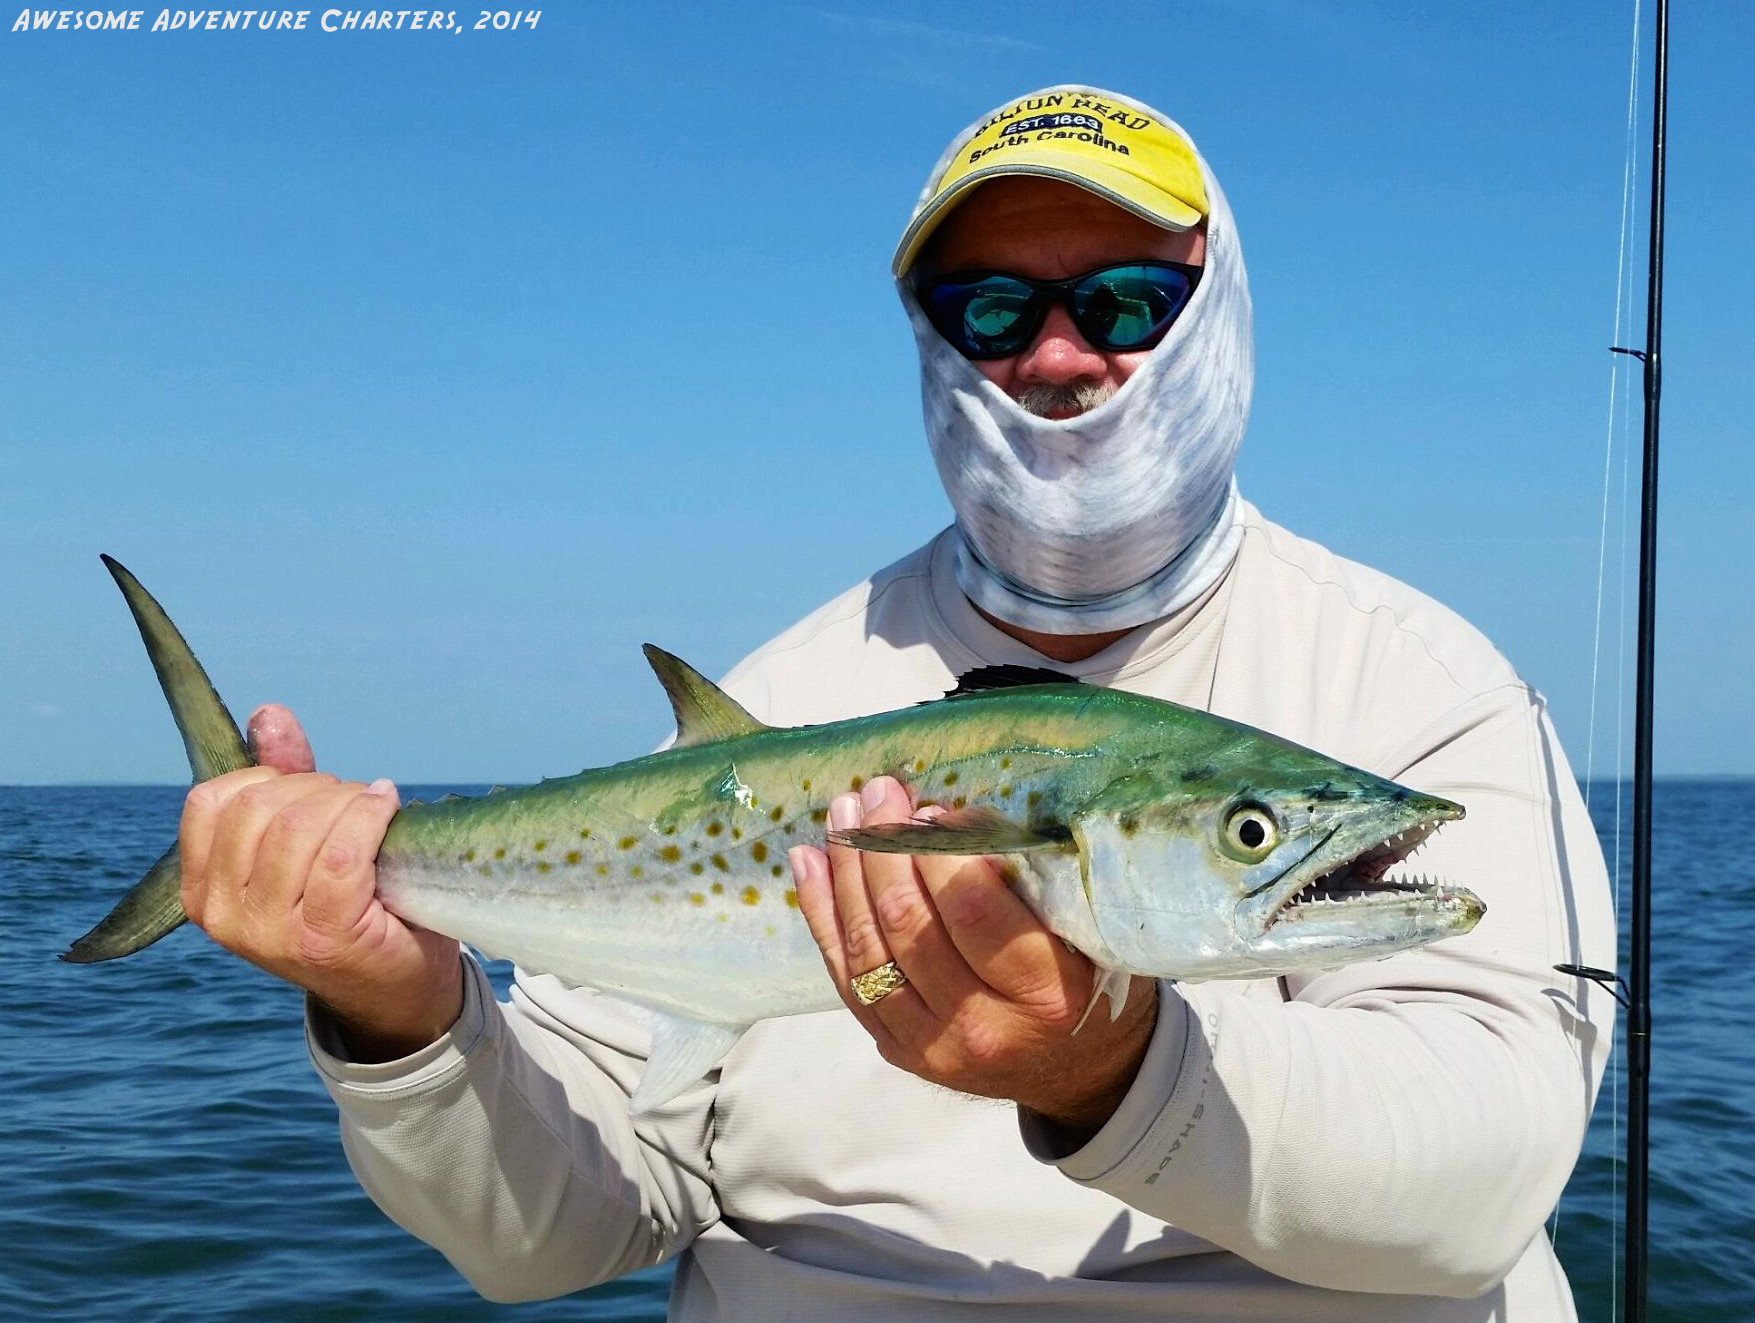 Awesome Adventures Charters Llc: 3/4 Day Charter